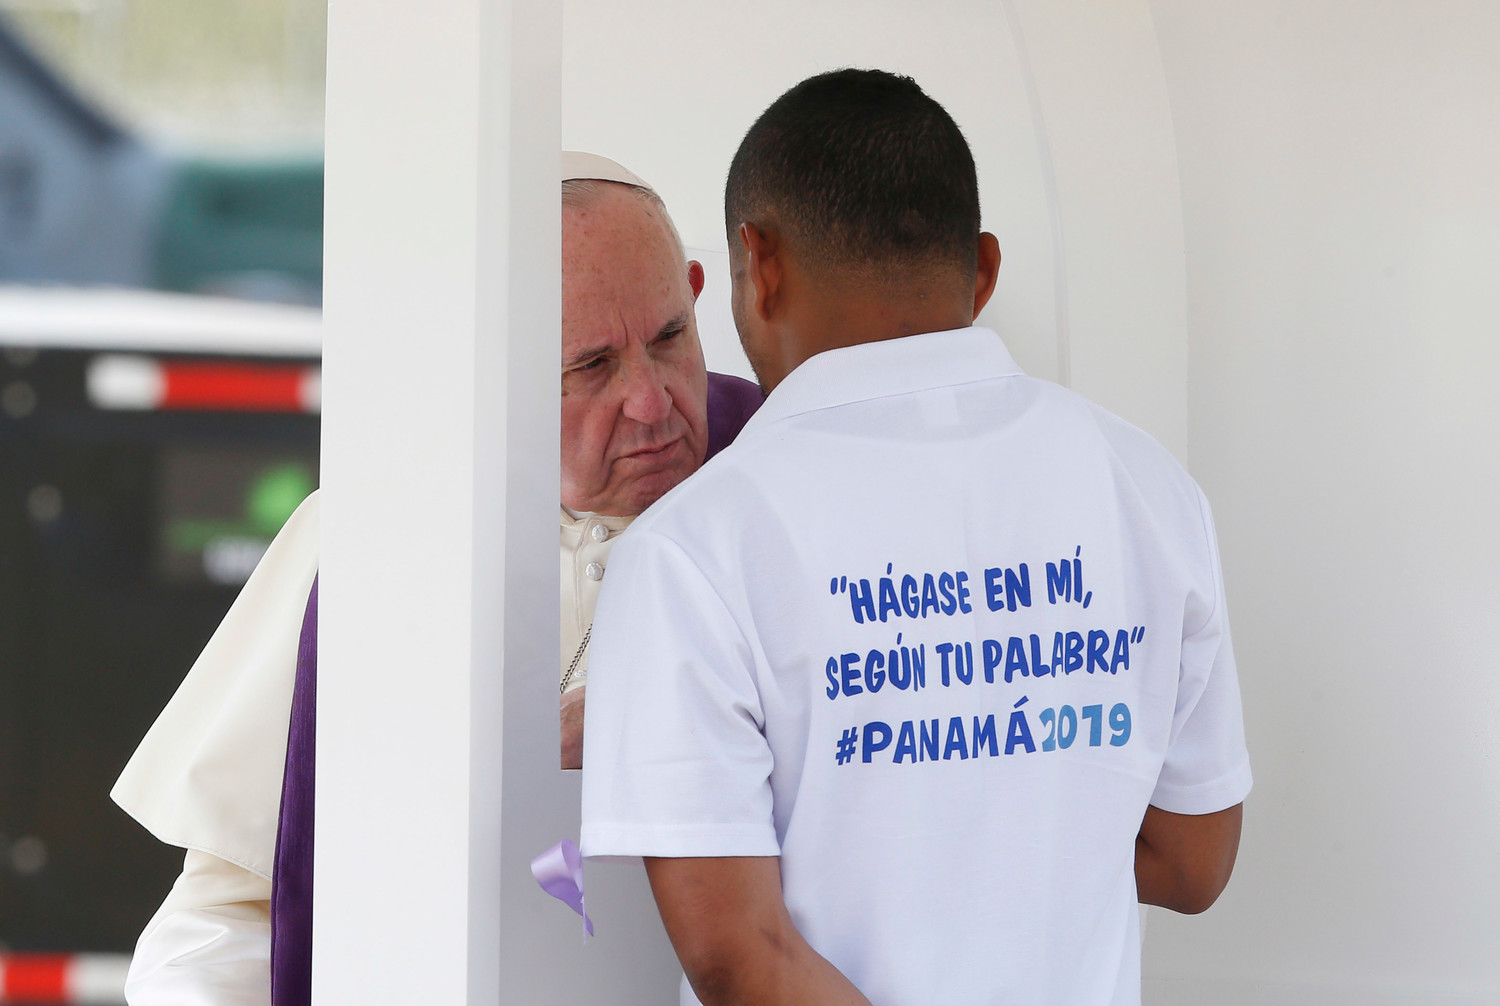 Pope Francis hears confession during a penitential liturgy with juvenile detainees in Las Garzas de Pacora Juvenile Detention Center in Pacora, Panama, Jan. 25, 2019.